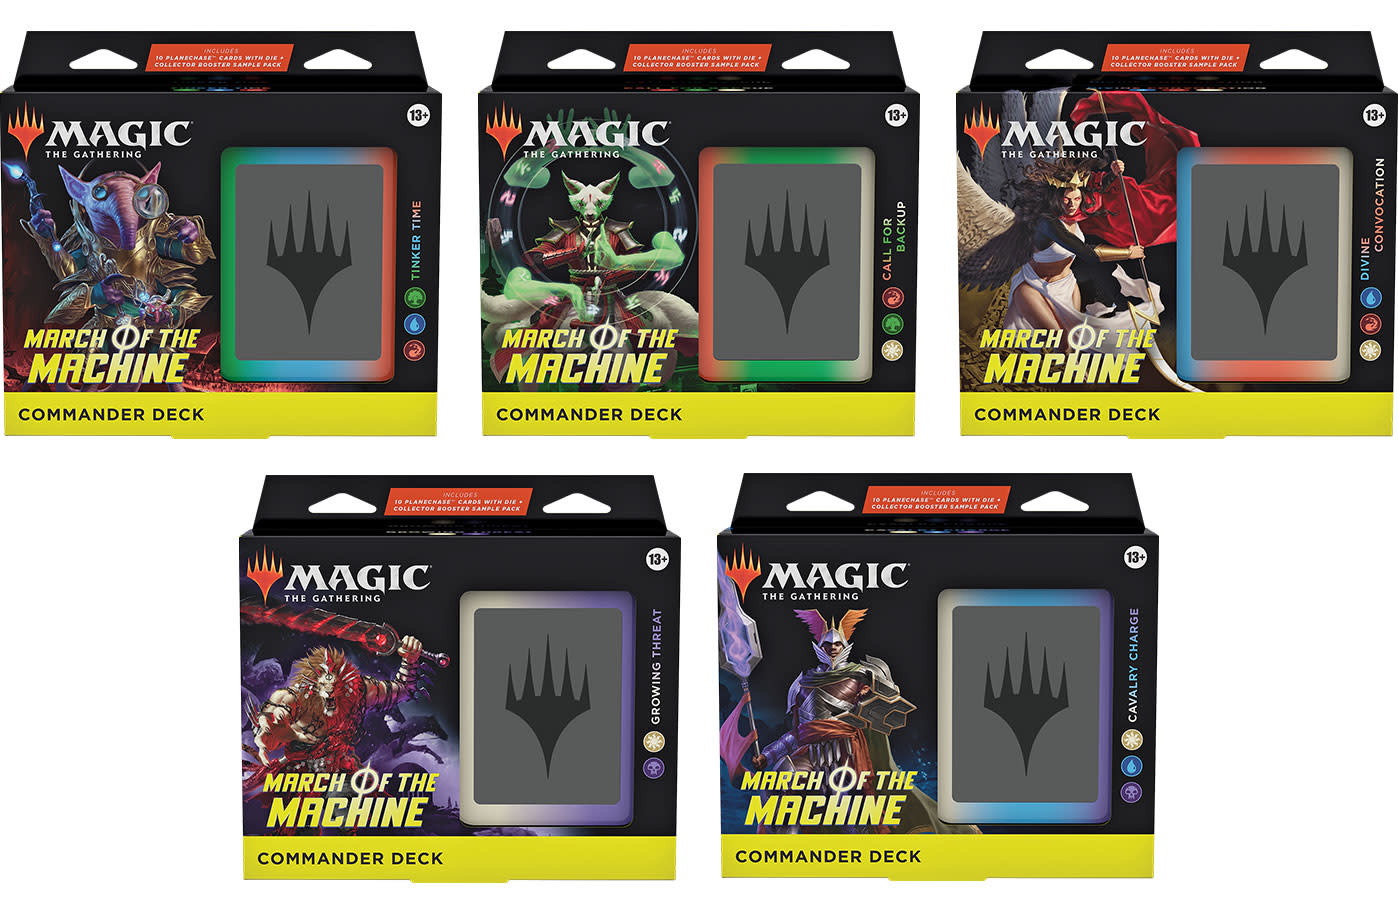 Magic The Gathering March of the Machine Commander Deck - Cavalry Charge  (100-Card Deck, 10 Planechase cards, Collector Booster Sample Pack +